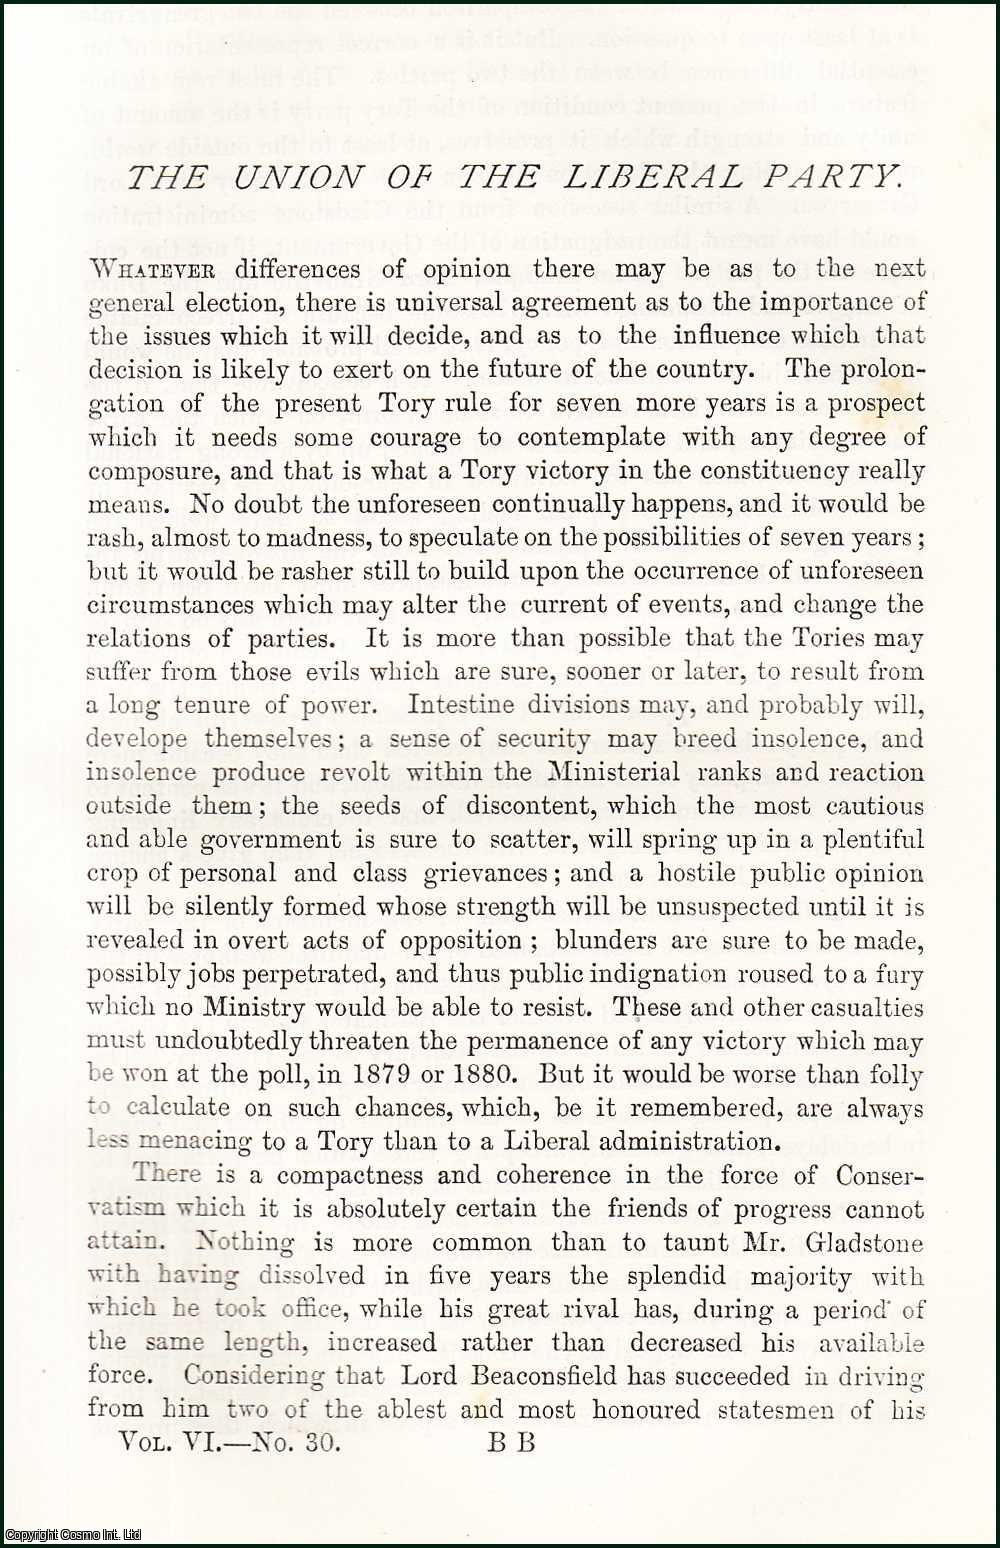 J. Guinness Rogers - The Union of The Liberal Party. An original article from the Nineteenth Century Magazine, 1879.